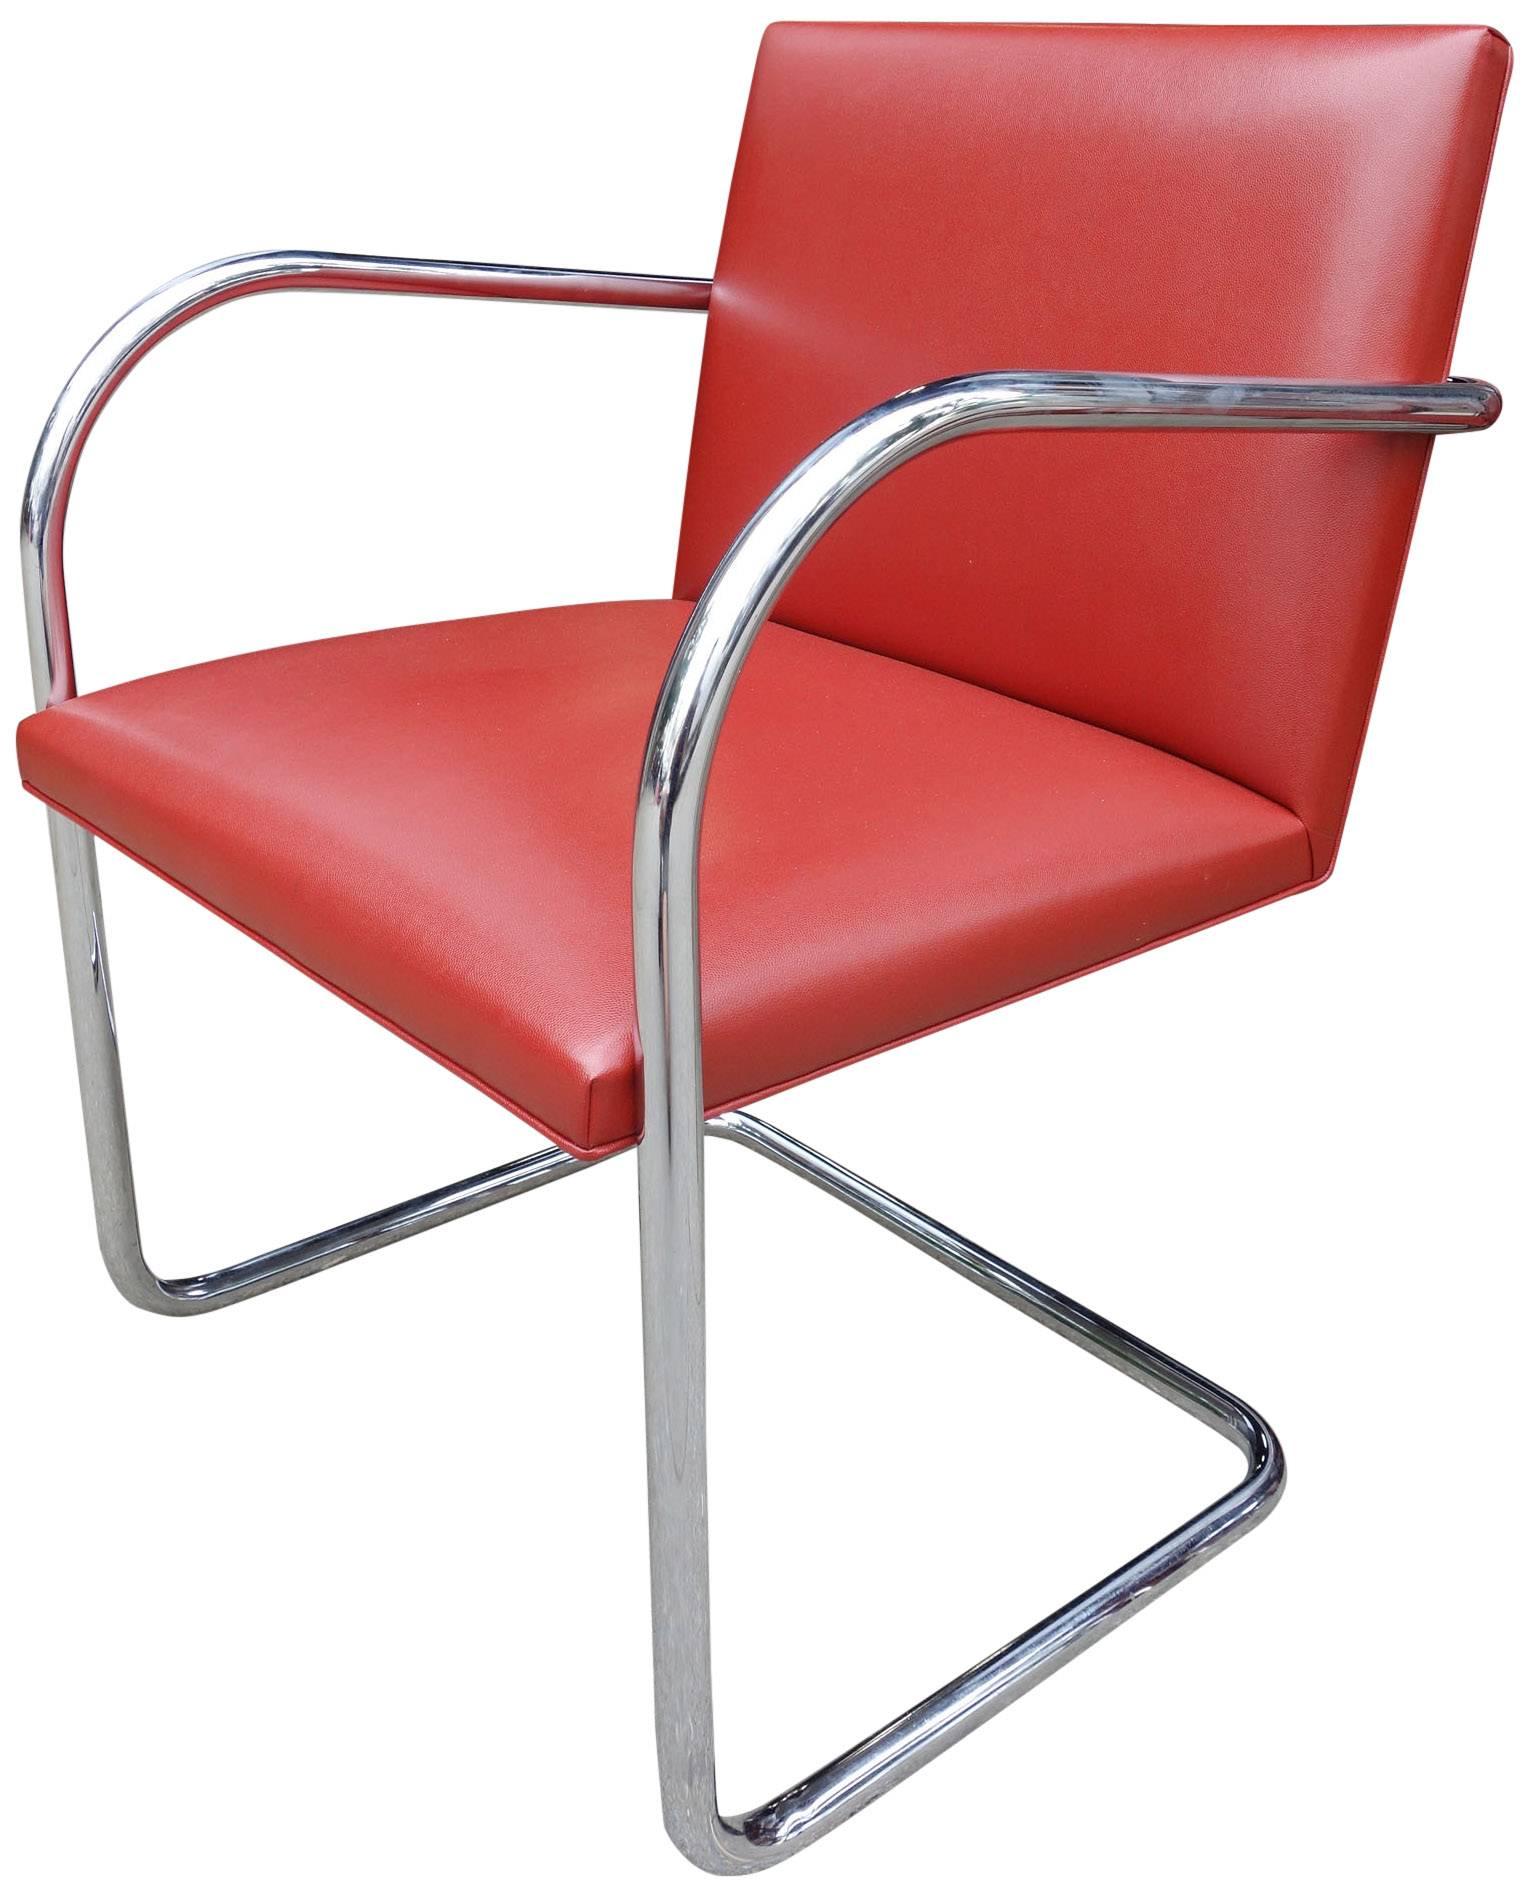 Mid-Century Modern Midcentury Knoll Brno Chairs by Mies van der Rohe